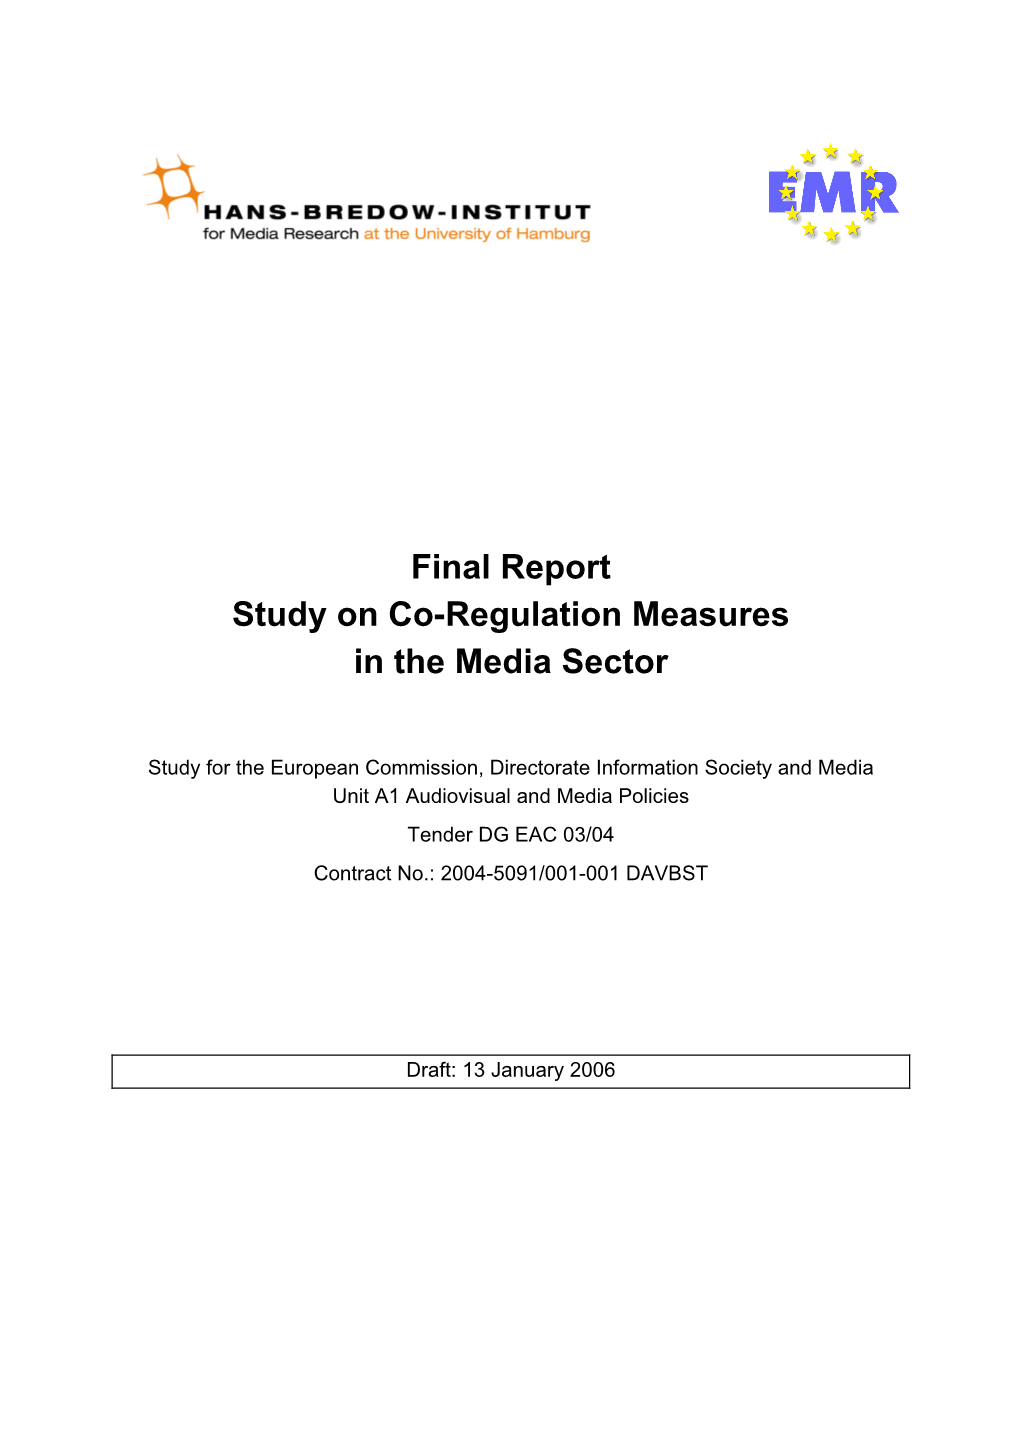 Final Report Study on Co-Regulation Measures in the Media Sector